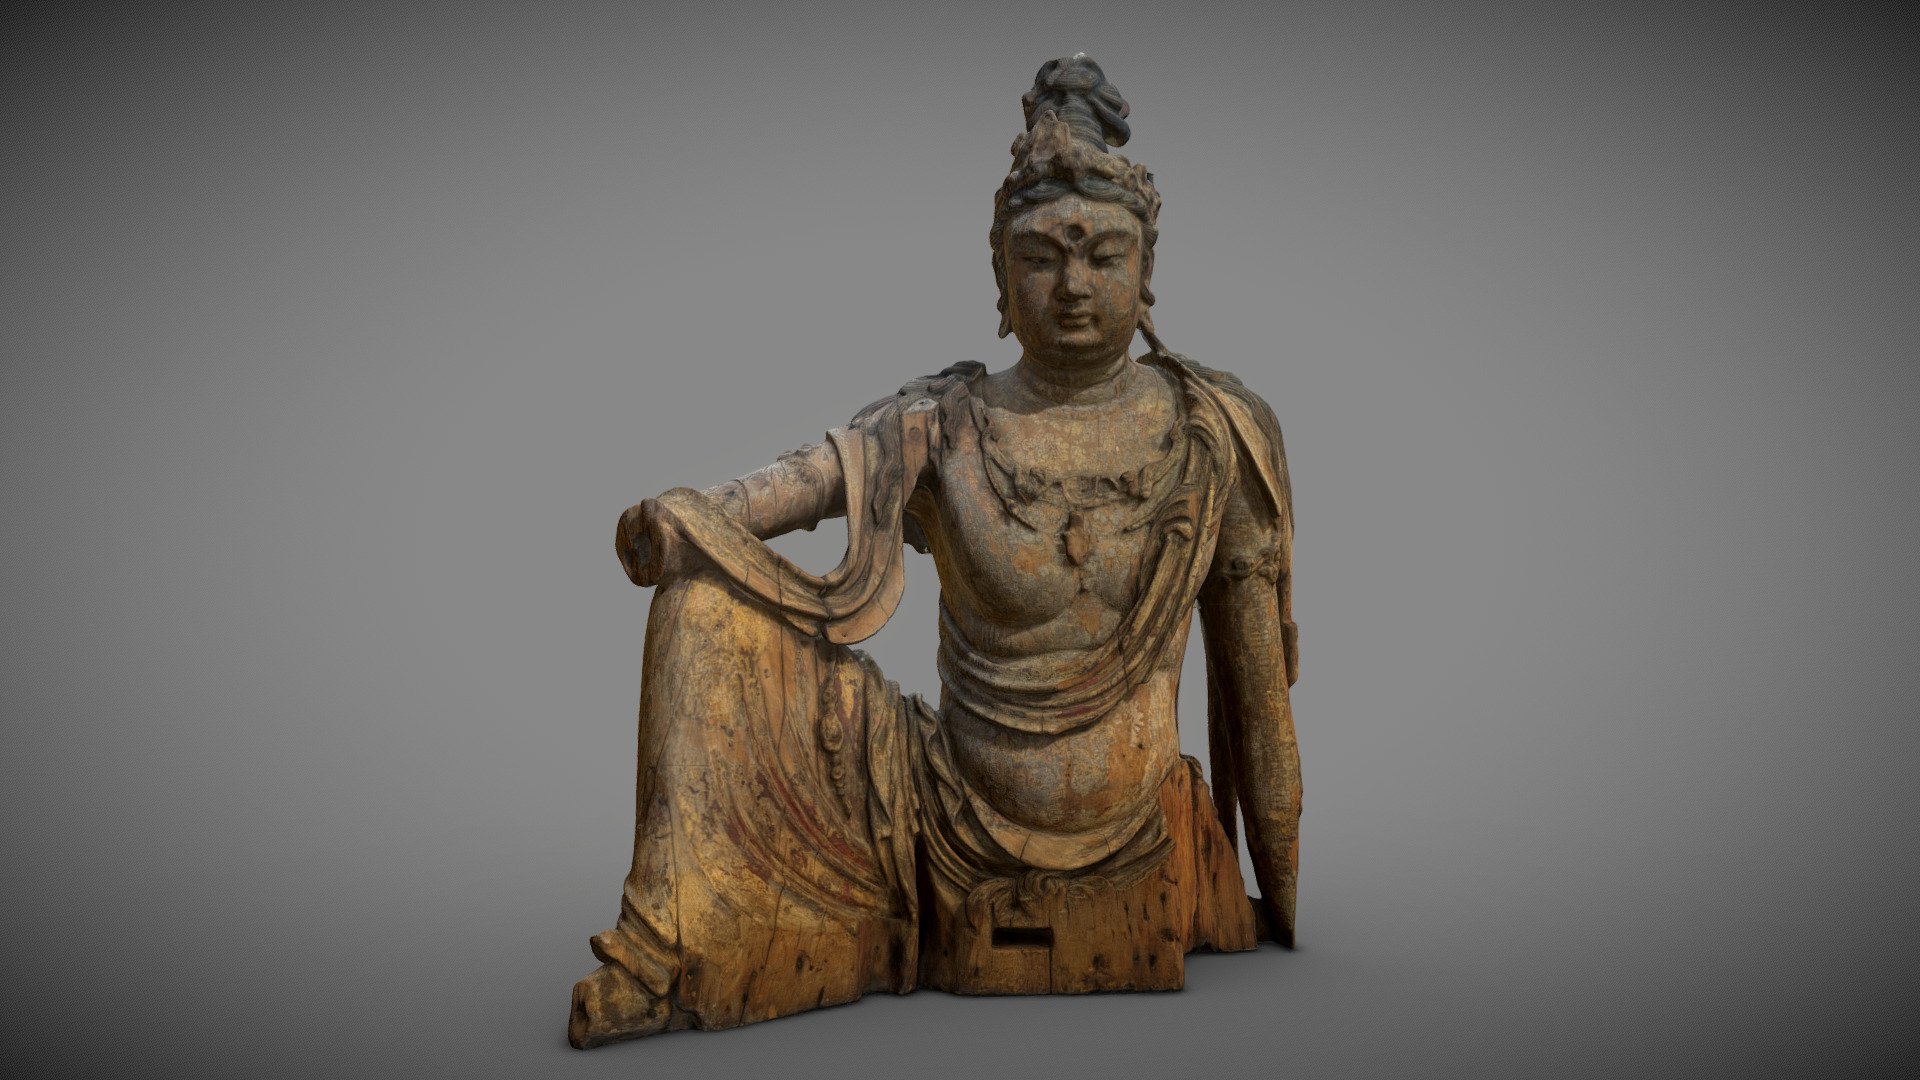 Bodhisattva, Shanxi Province, Jin Dynasty, circa 1200, wood, traces of gold and polychrome. Musée d'Art et d'Histoire (Musée du Cinquantenaire, Brussels, Belgium). Made with Zephyr3D Lite from 3DFlow.

The Bodhisattva is the central figure of Mahayana Buddhism. He has attained a high spiritual level but he differs his enlightenment to help other men on the spiritual path.
Here we see a representation of Guanyin (Avalokitesvara in Sanskrit), the bodhisattva of compassion. While in India, this bodhisattva is still depicted as a man, in regions further east of Asia he looks like an androgynous, even a woman. Unlike the soberly dressed Buddha, bodhisattvas often wear royal garments, ornaments, crowns and other jewels. This work shows a remarkable necklace enhanced with two entangled dragons.
The attitude represented is that of the &ldquo;royal relaxation